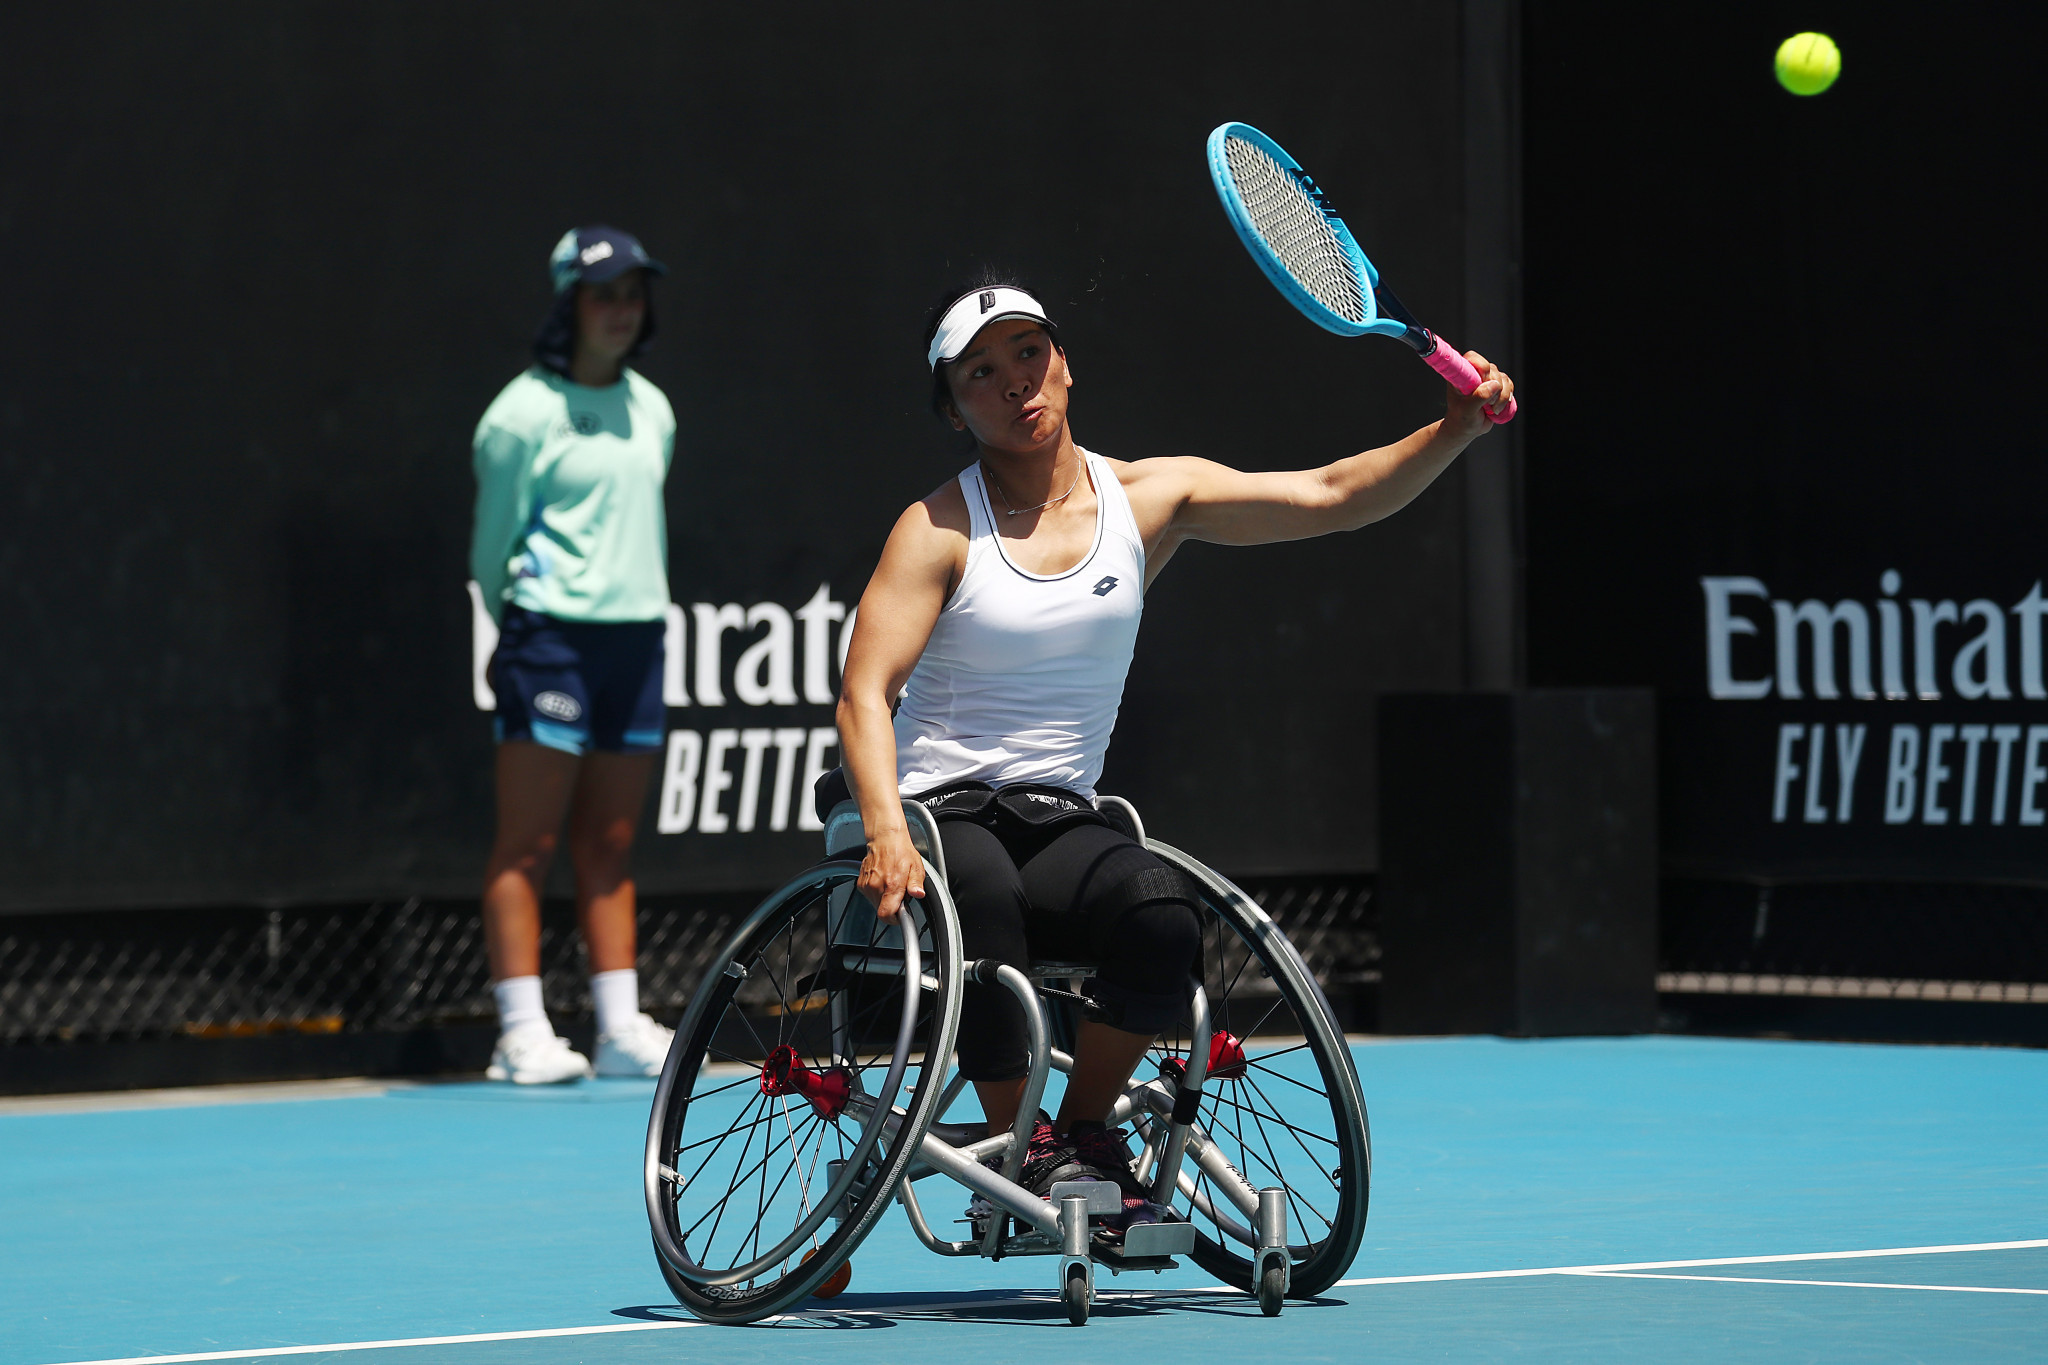 World number six Zhu aims to grow wheelchair tennis in China